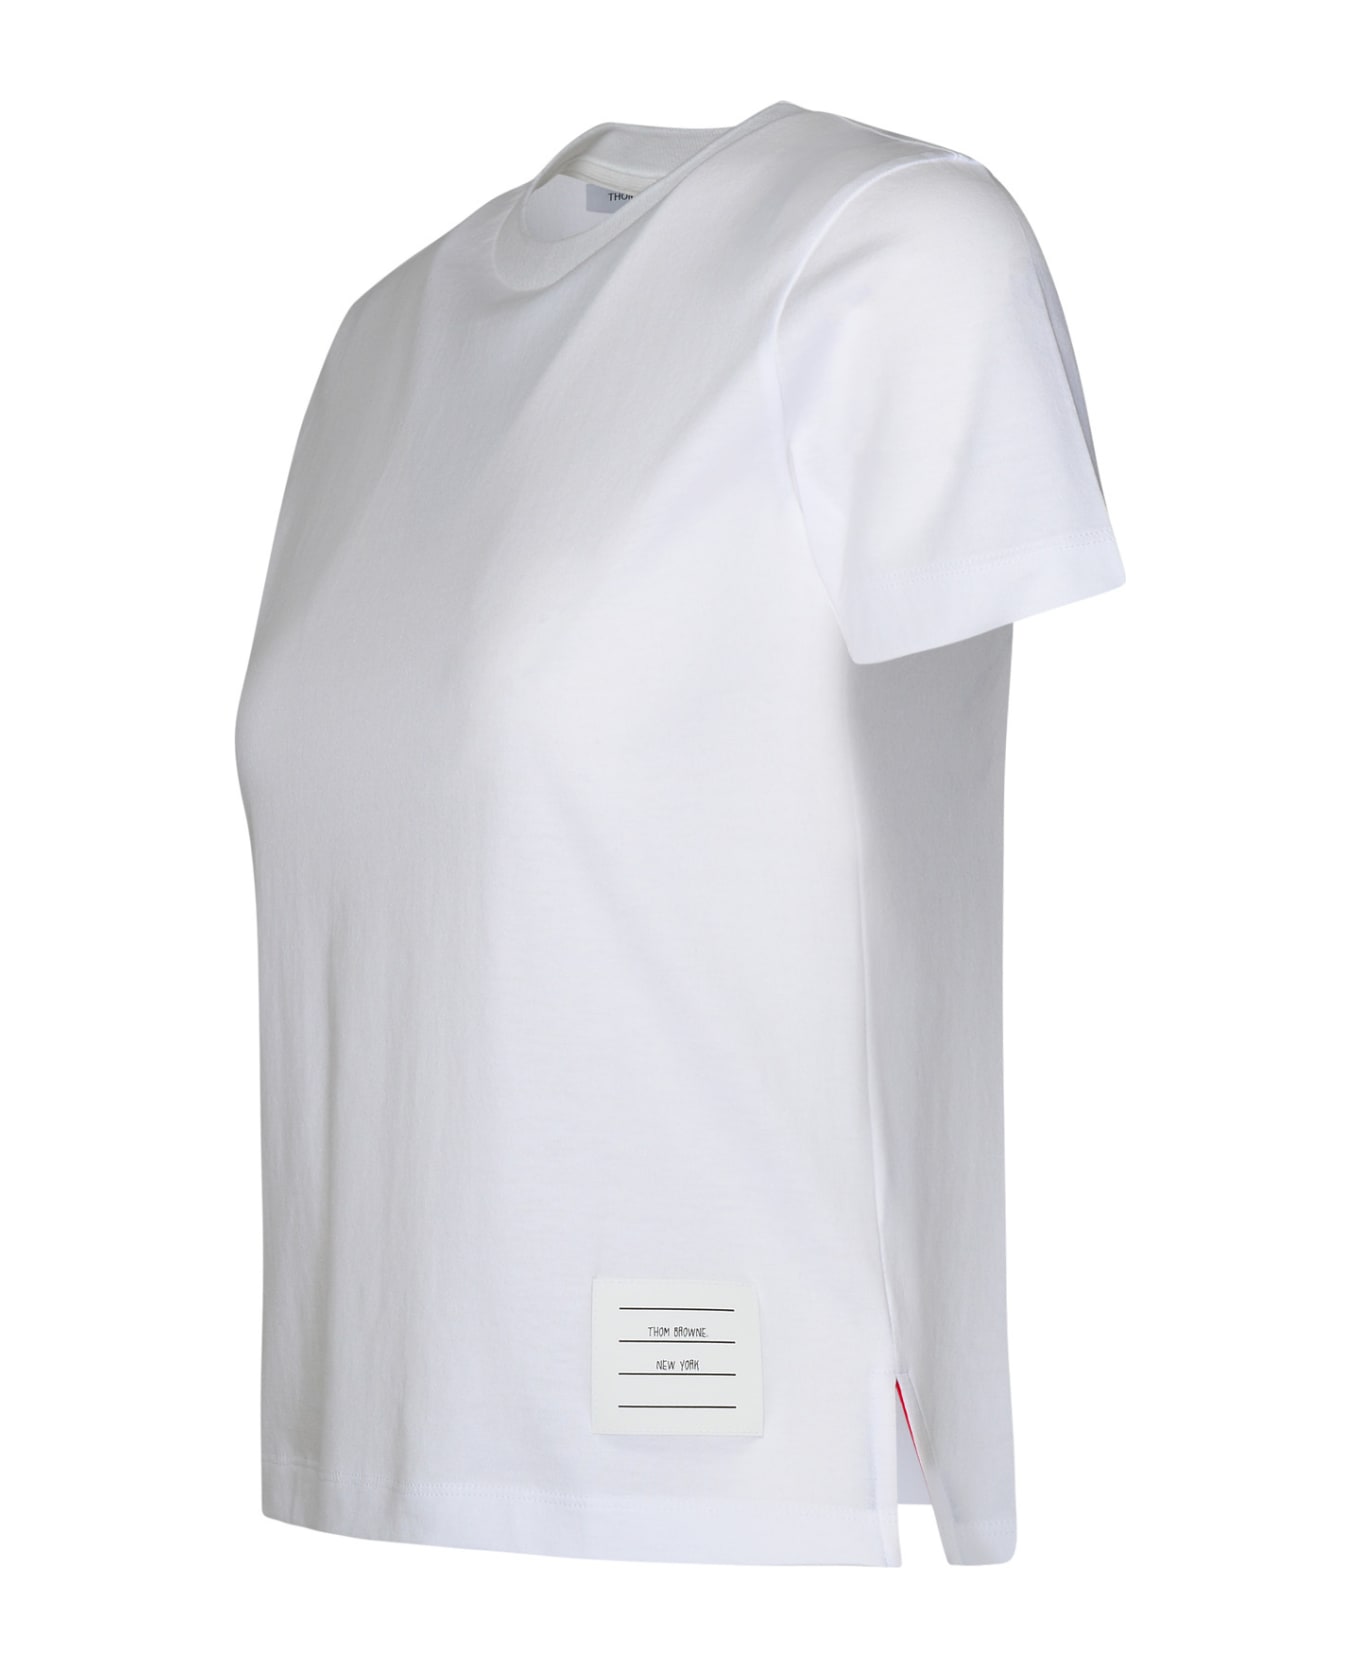 Thom Browne 'relaxed' White Cotton T-shirt - White Tシャツ